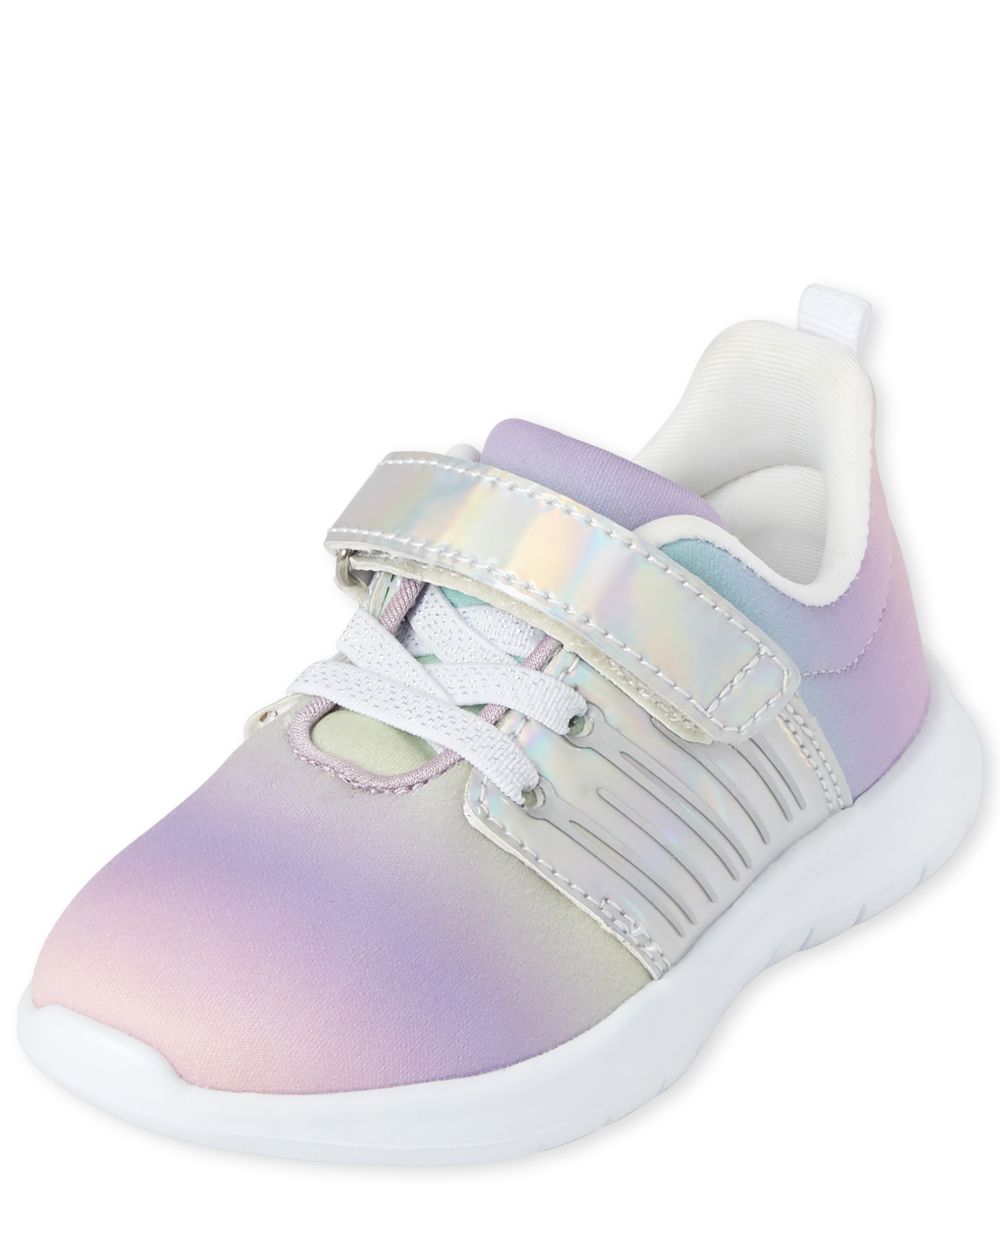 

Baby Girls Toddler Rainbow Running Sneakers - Multi - The Children's Place